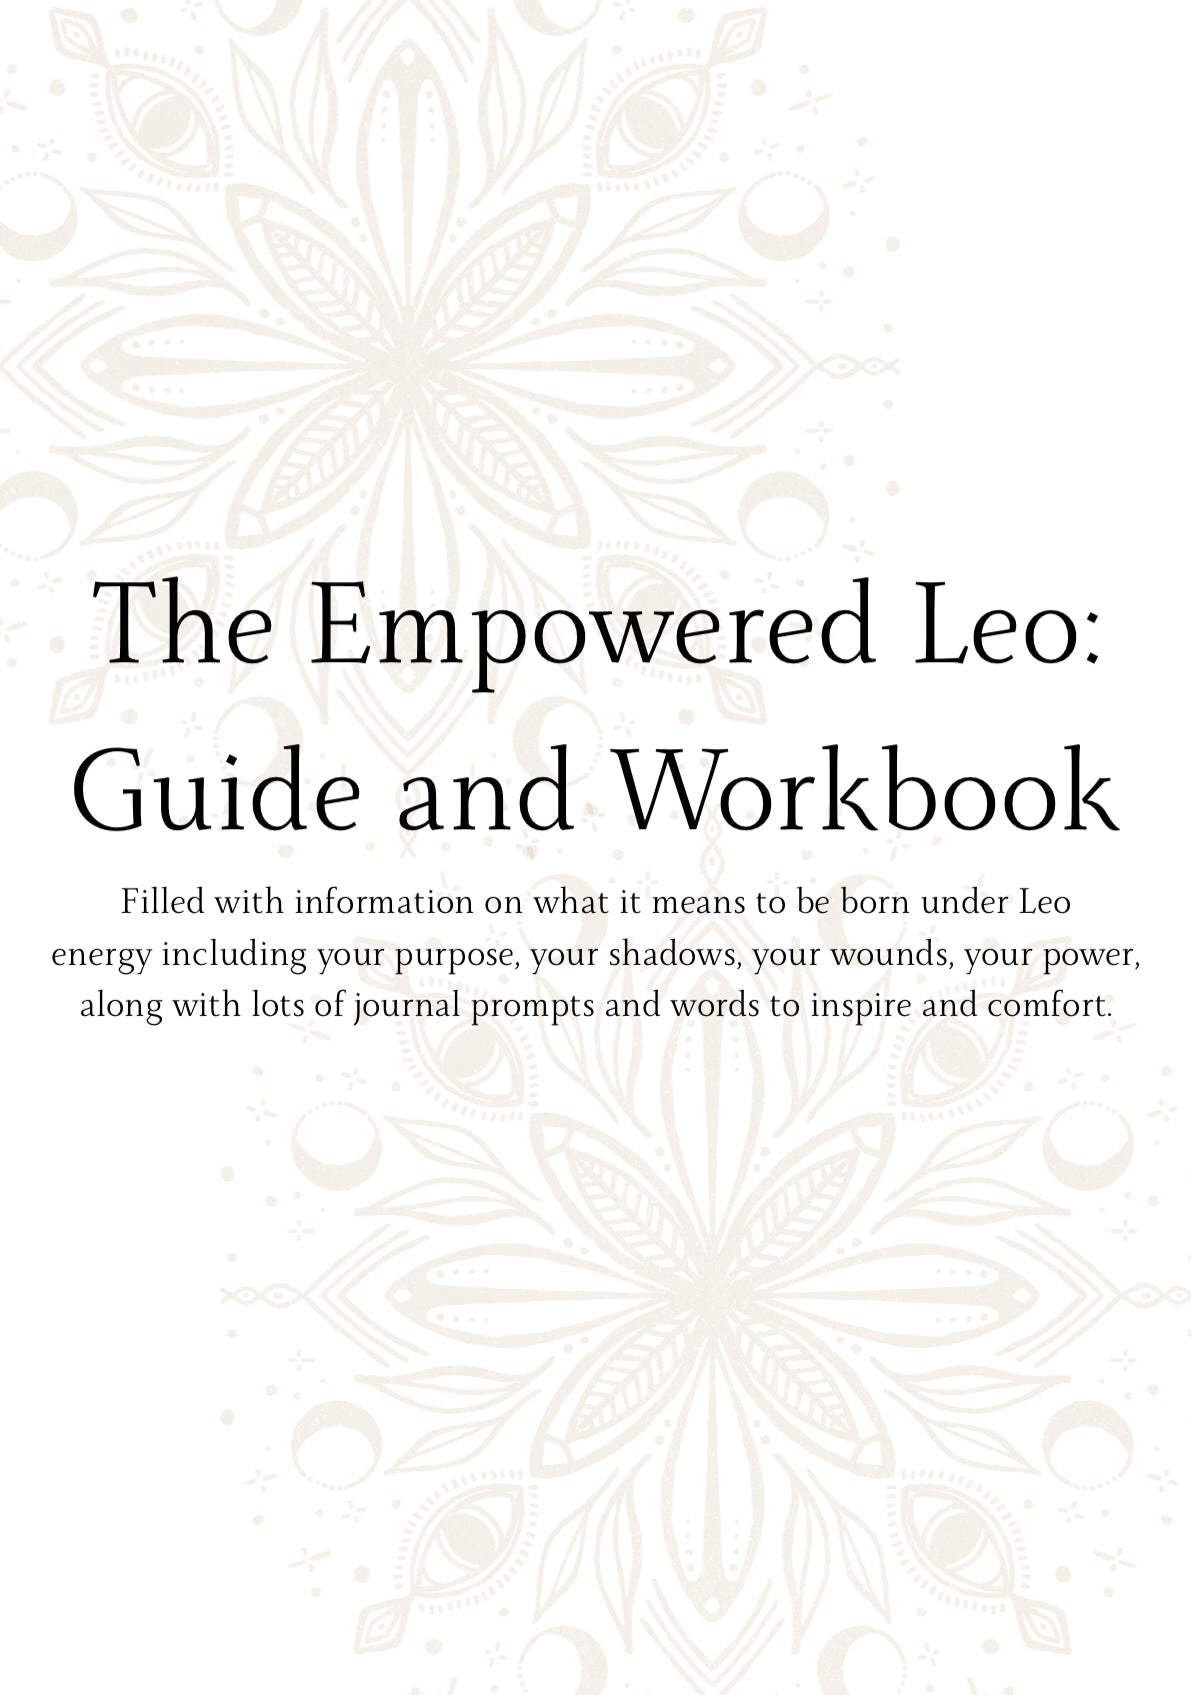 EMPOWERED LEO GUIDE